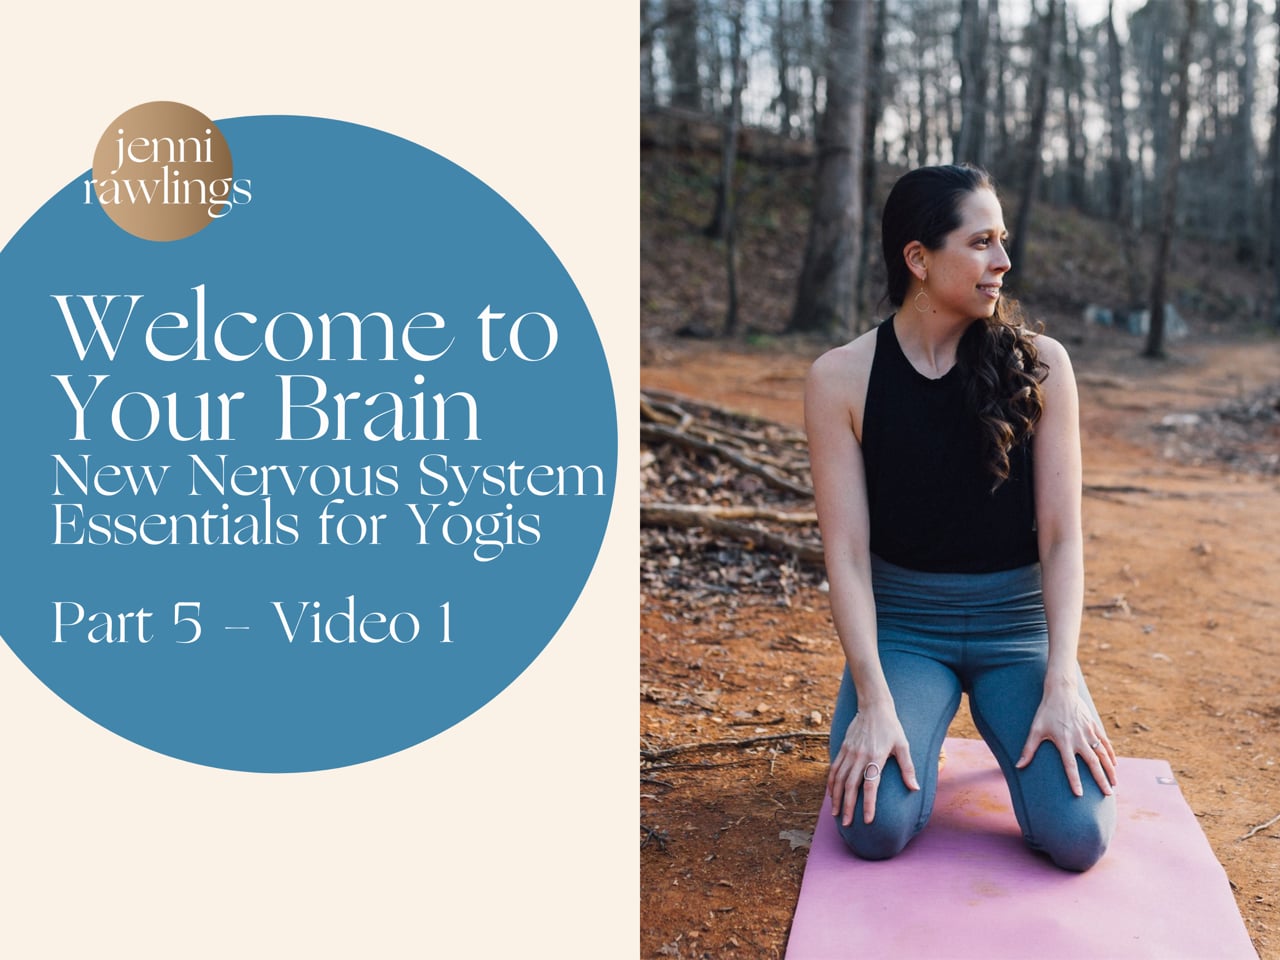 Part 5 Video 1 – Welcome to Your Brain